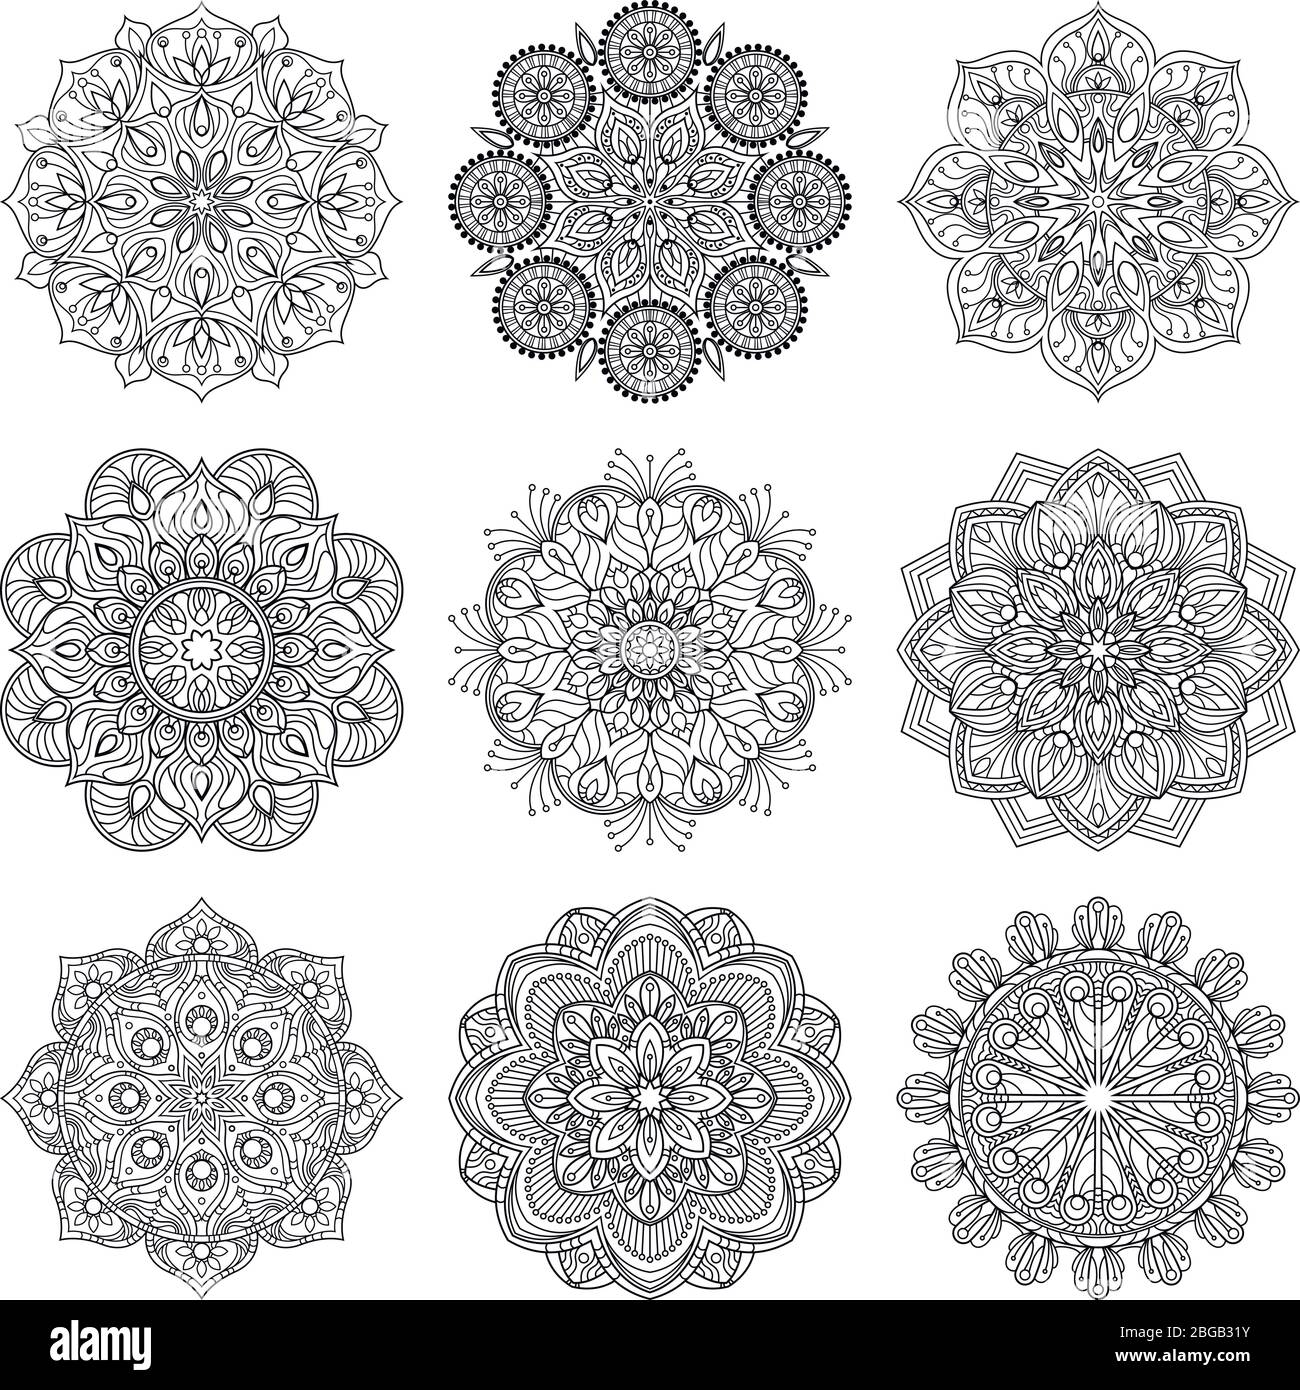 Vector illustration of indian mandalas. Old asian and arabic round texture isolate on white background Stock Vector